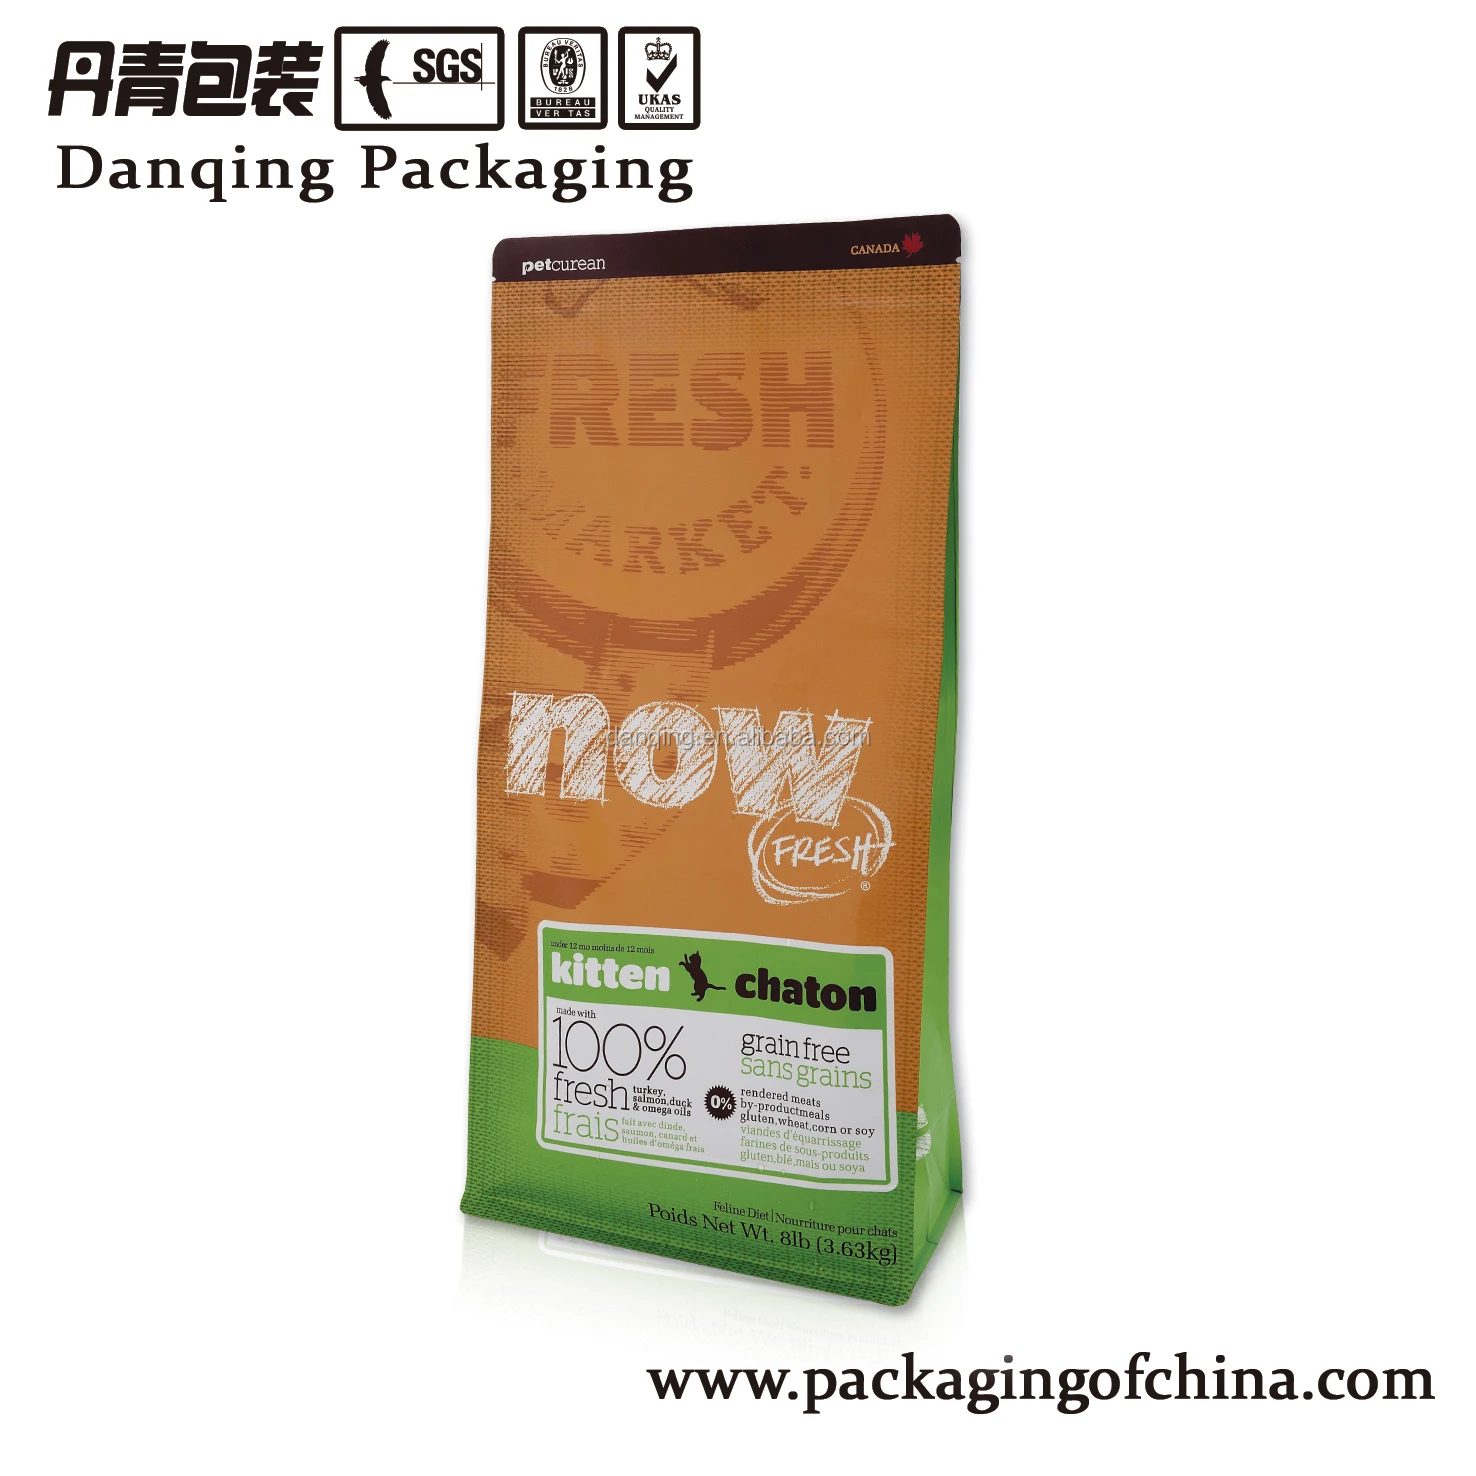 DQ PACK Custom Printed 1KG Brown & Wild Rice Packing Bag With Resealable Zipper